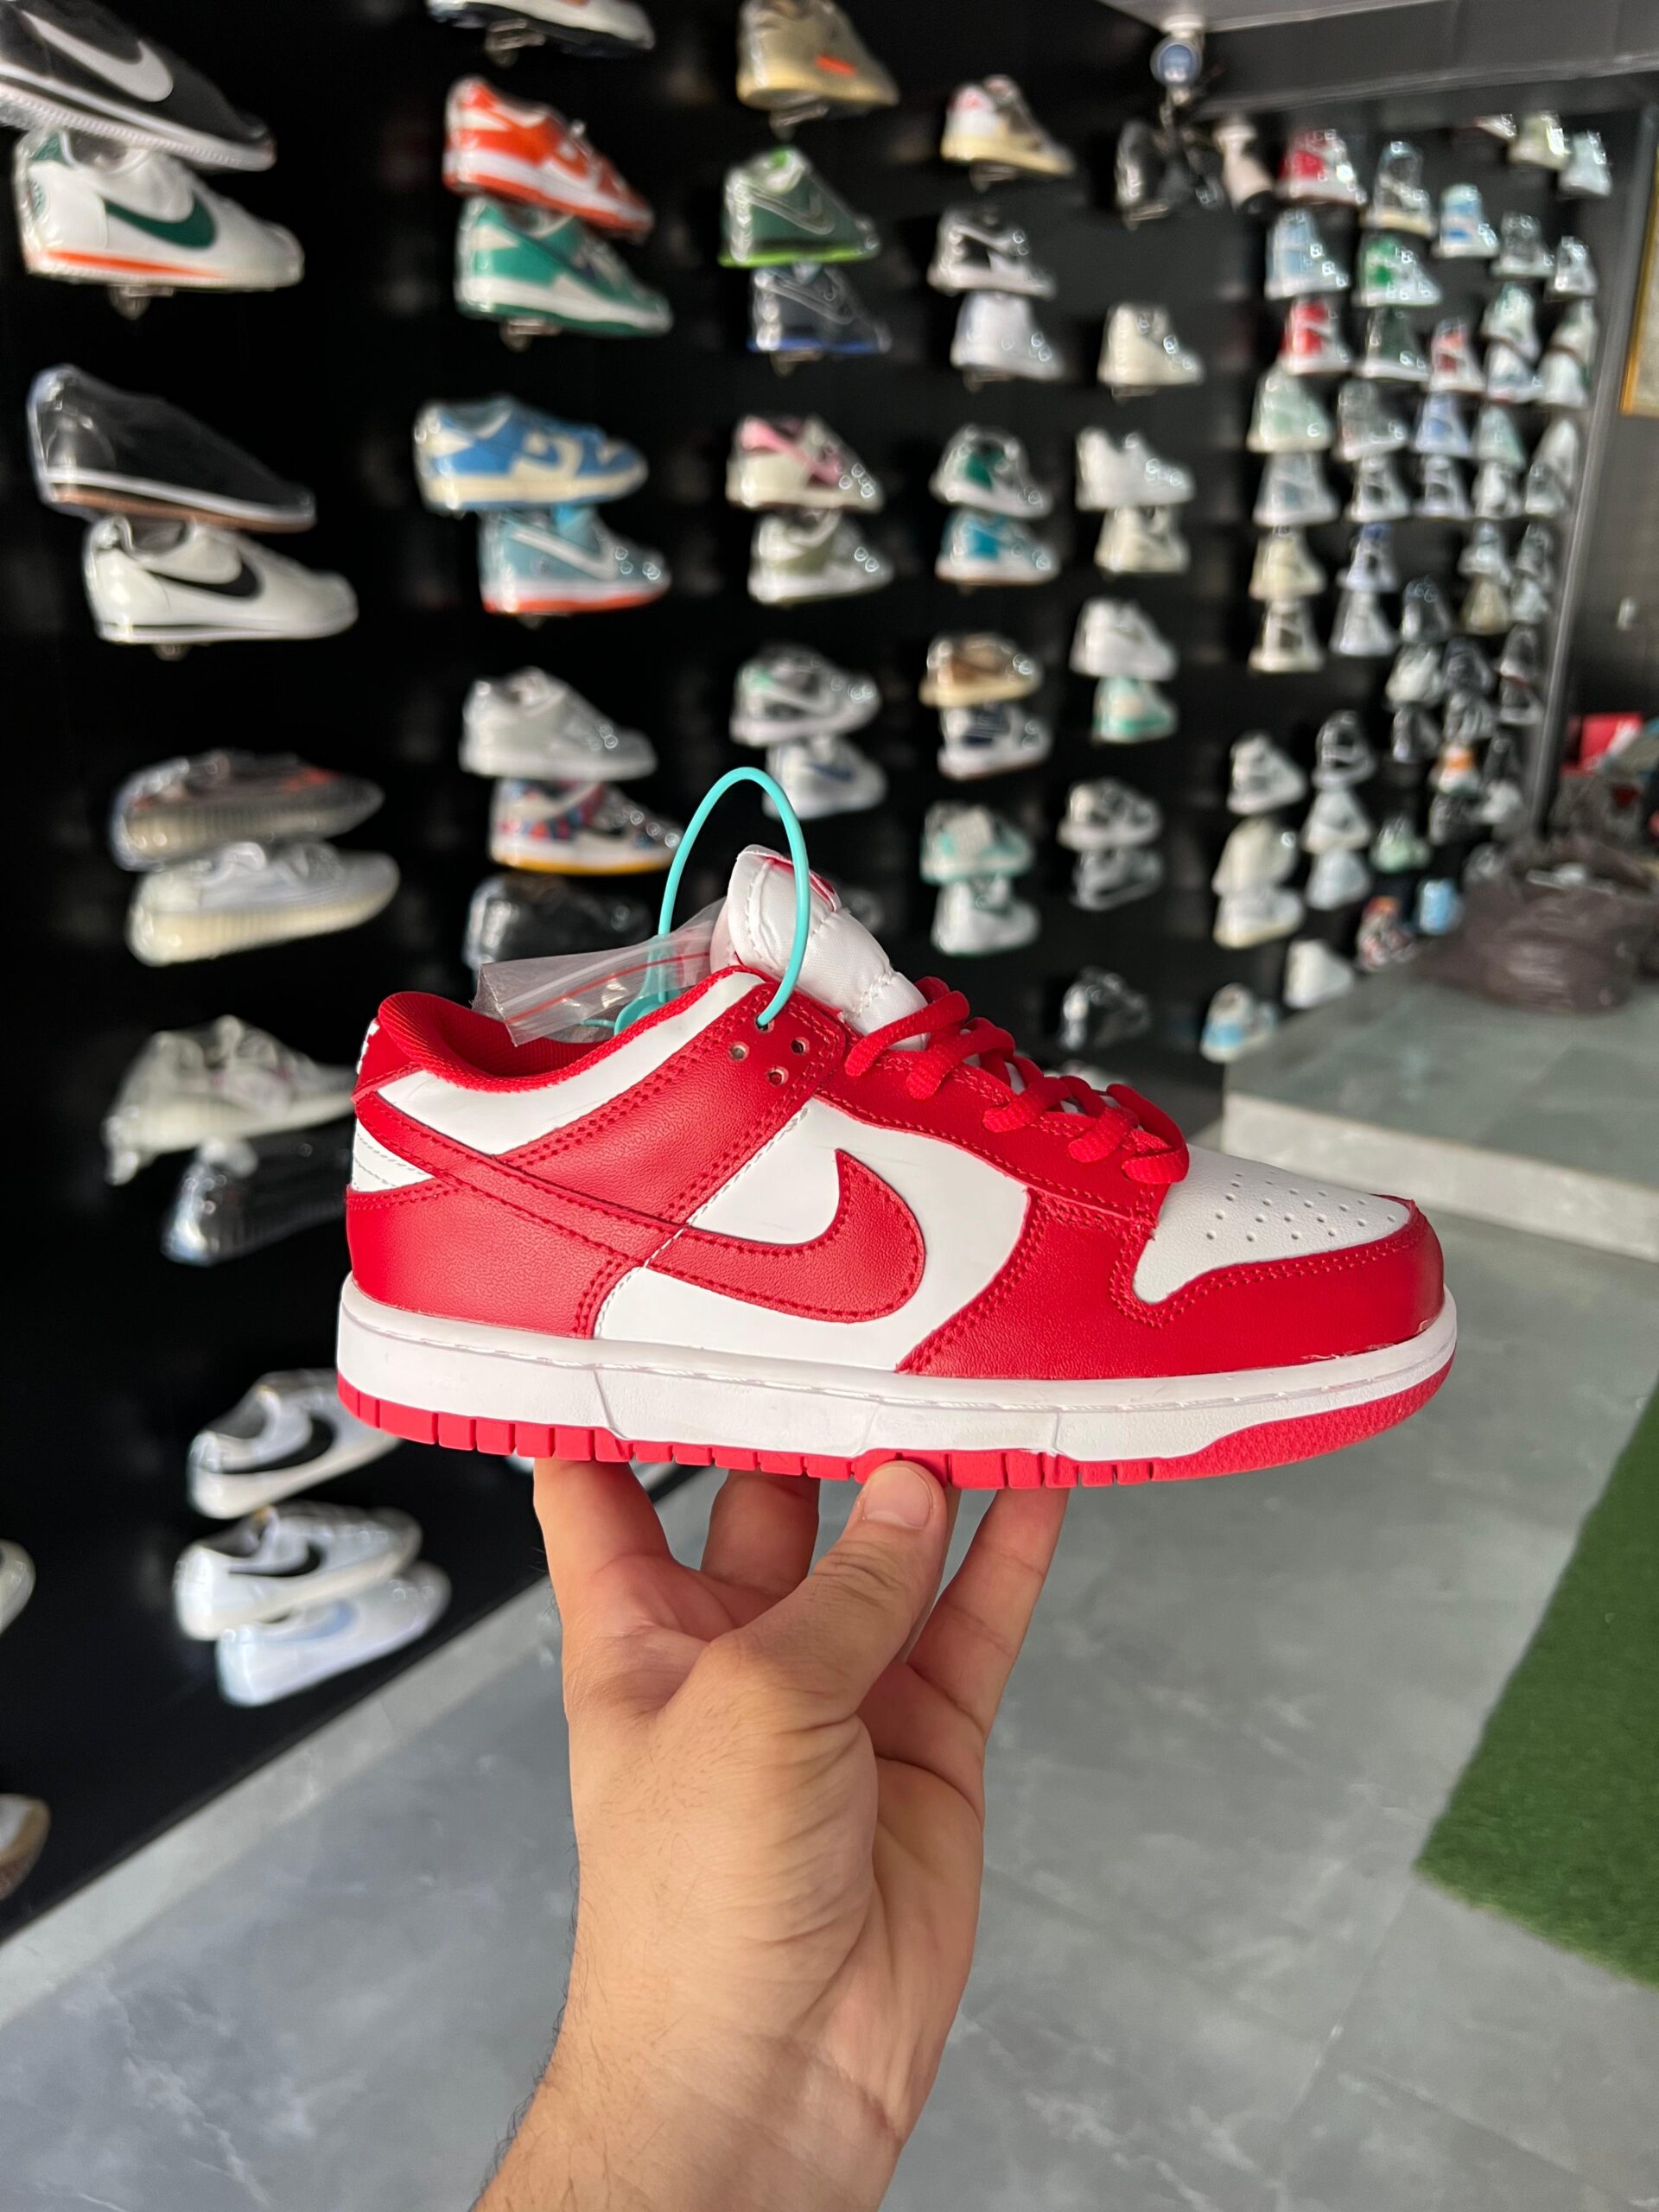 SB Dunk Gym Red Sneakers For Girls